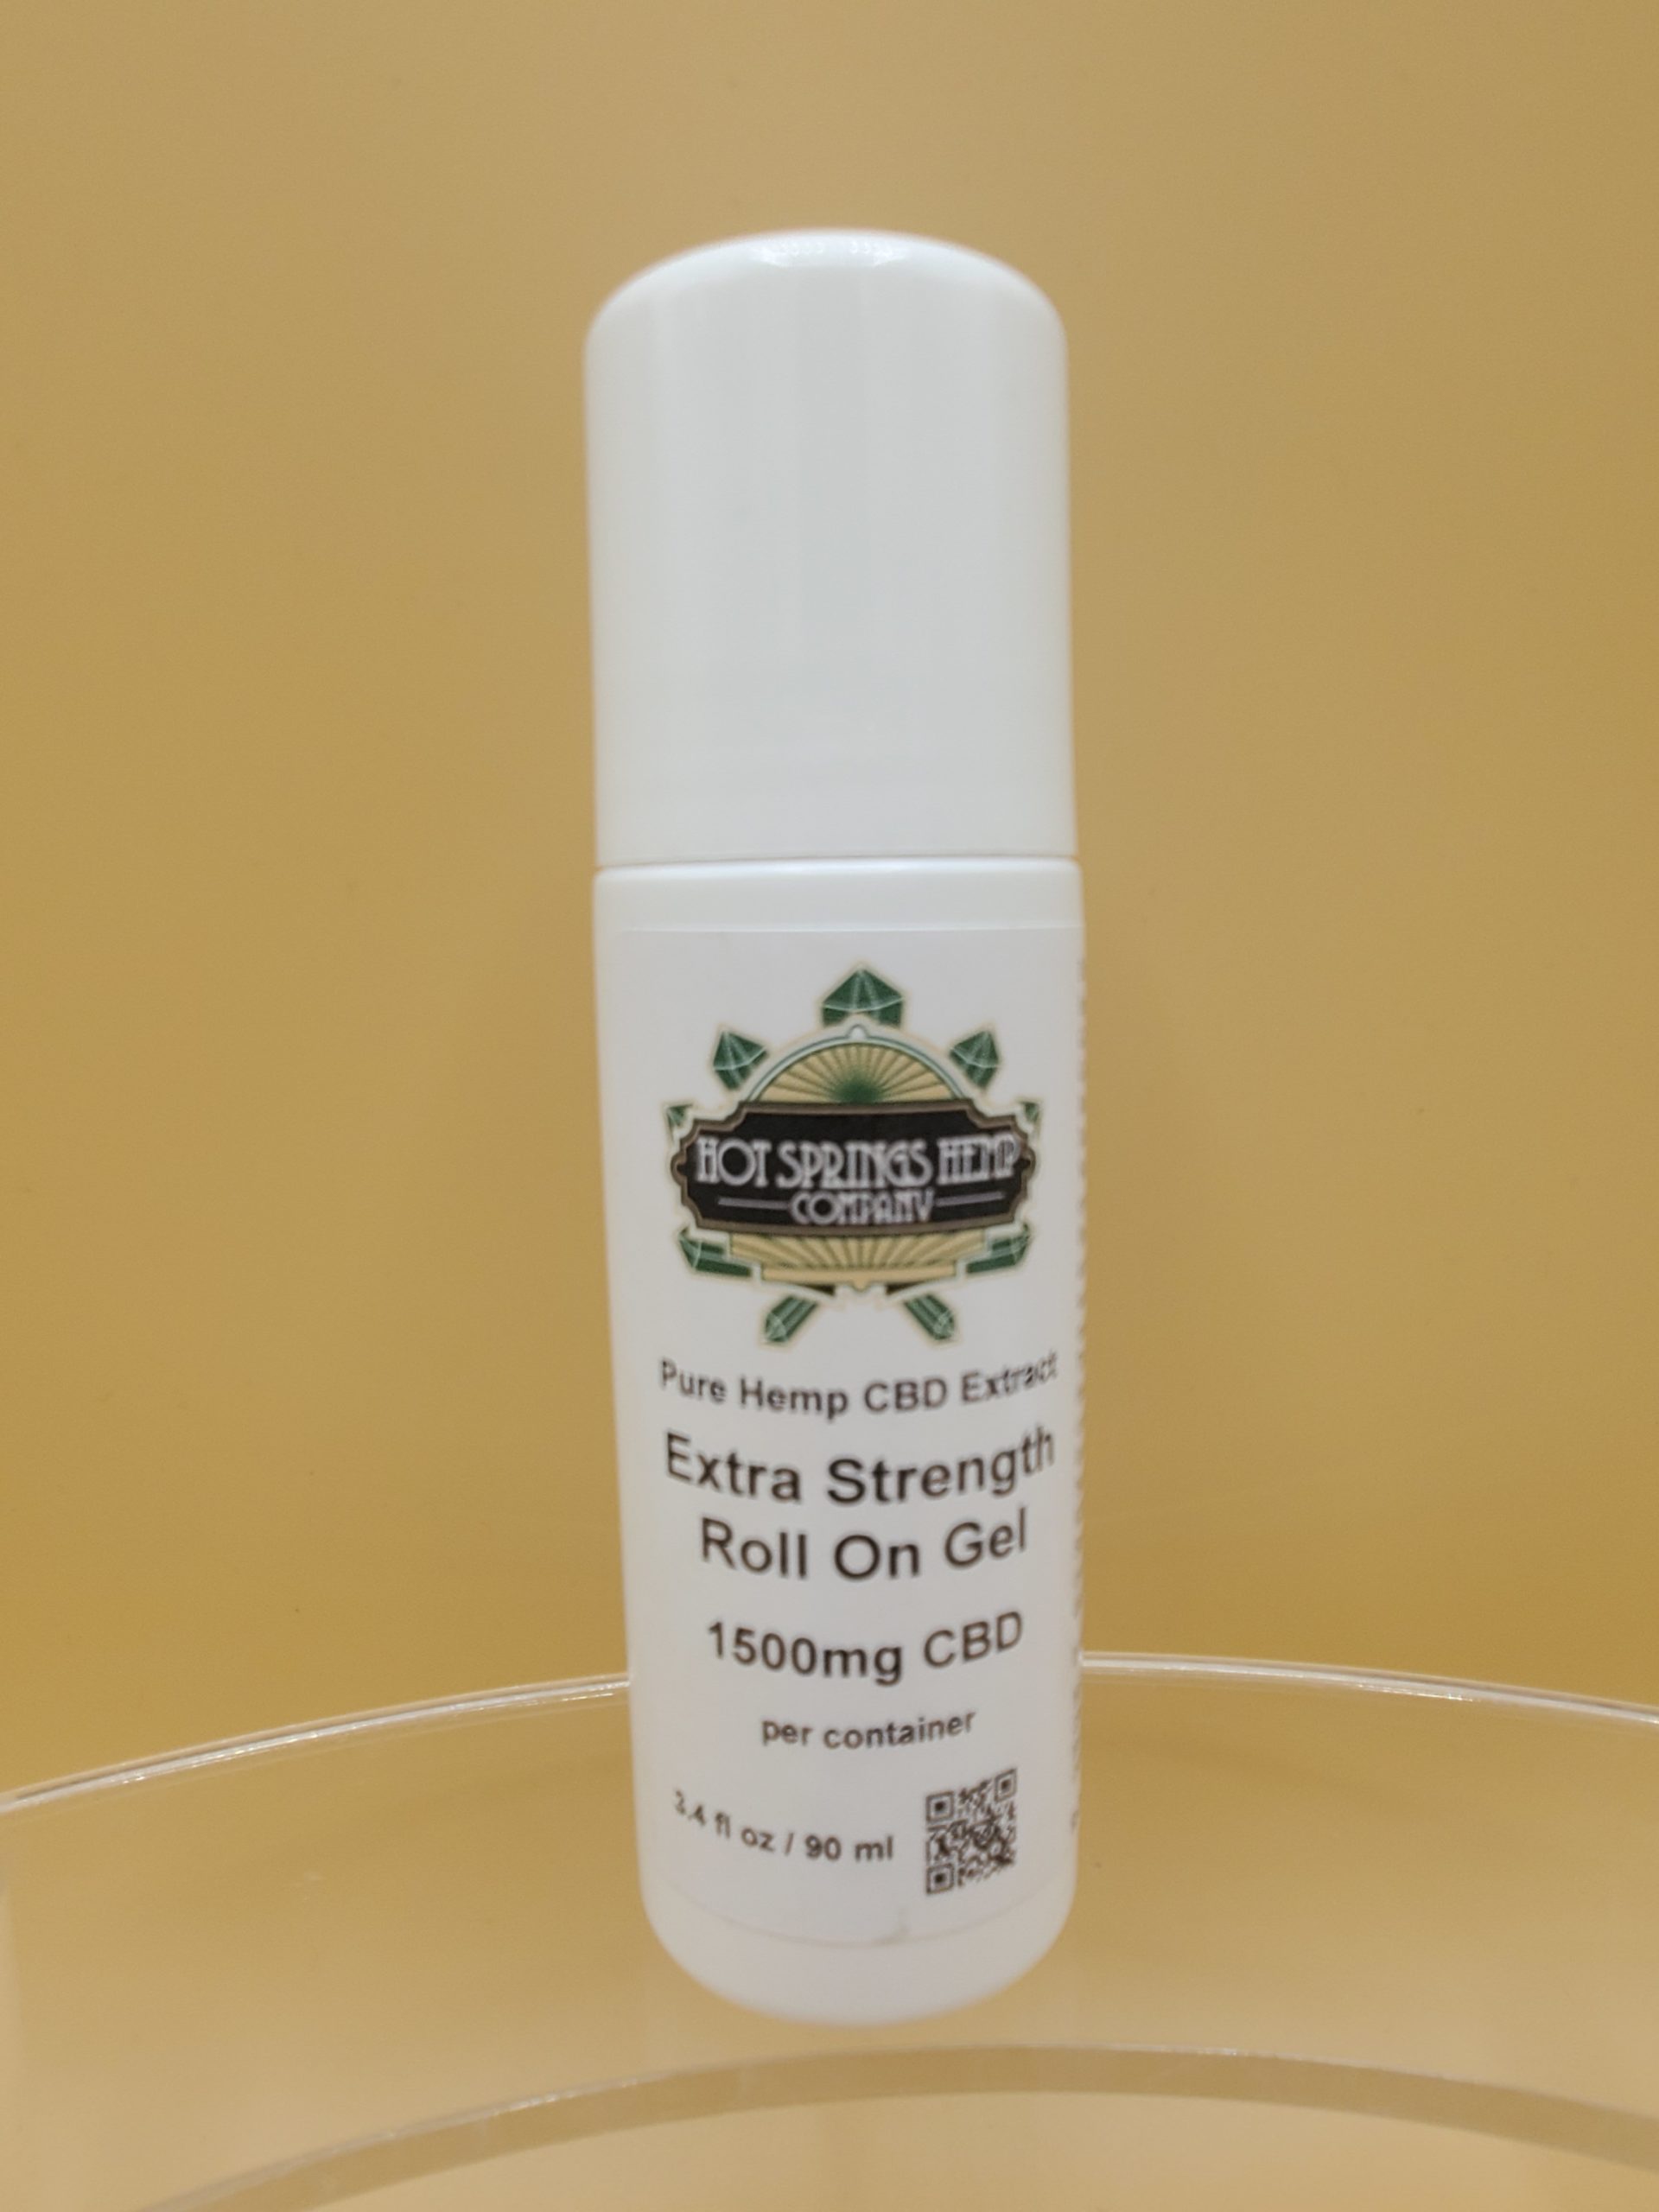 Cbd Gel For Joint Pain